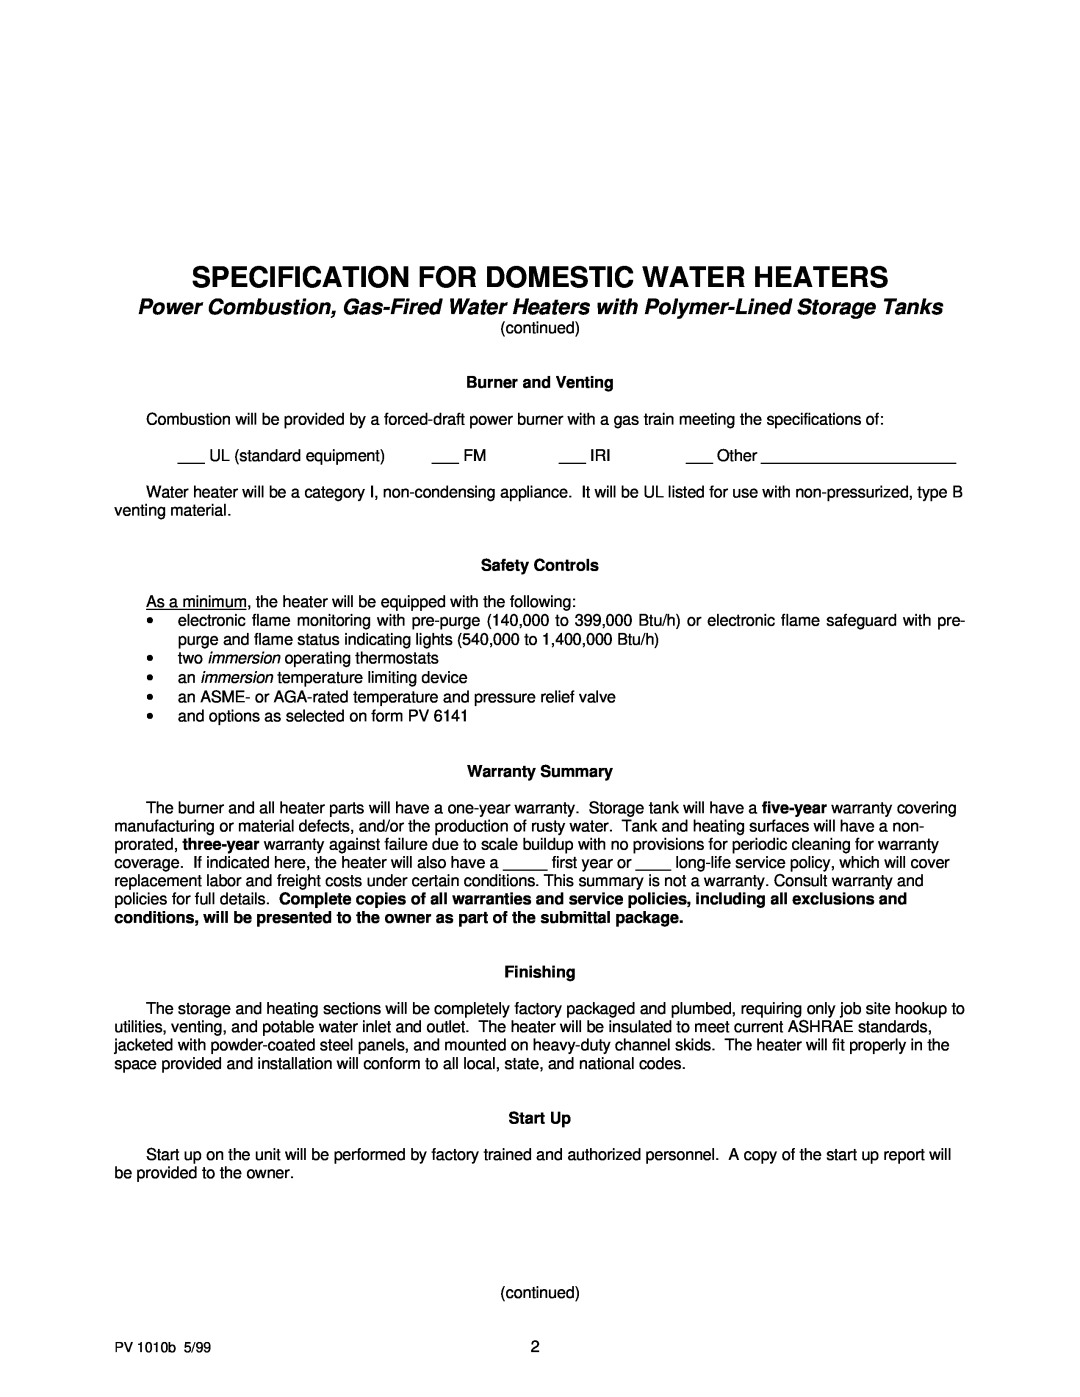 PVI Industries PV 1010b Specification For Domestic Water Heaters, Burner and Venting, Safety Controls, Warranty Summary 